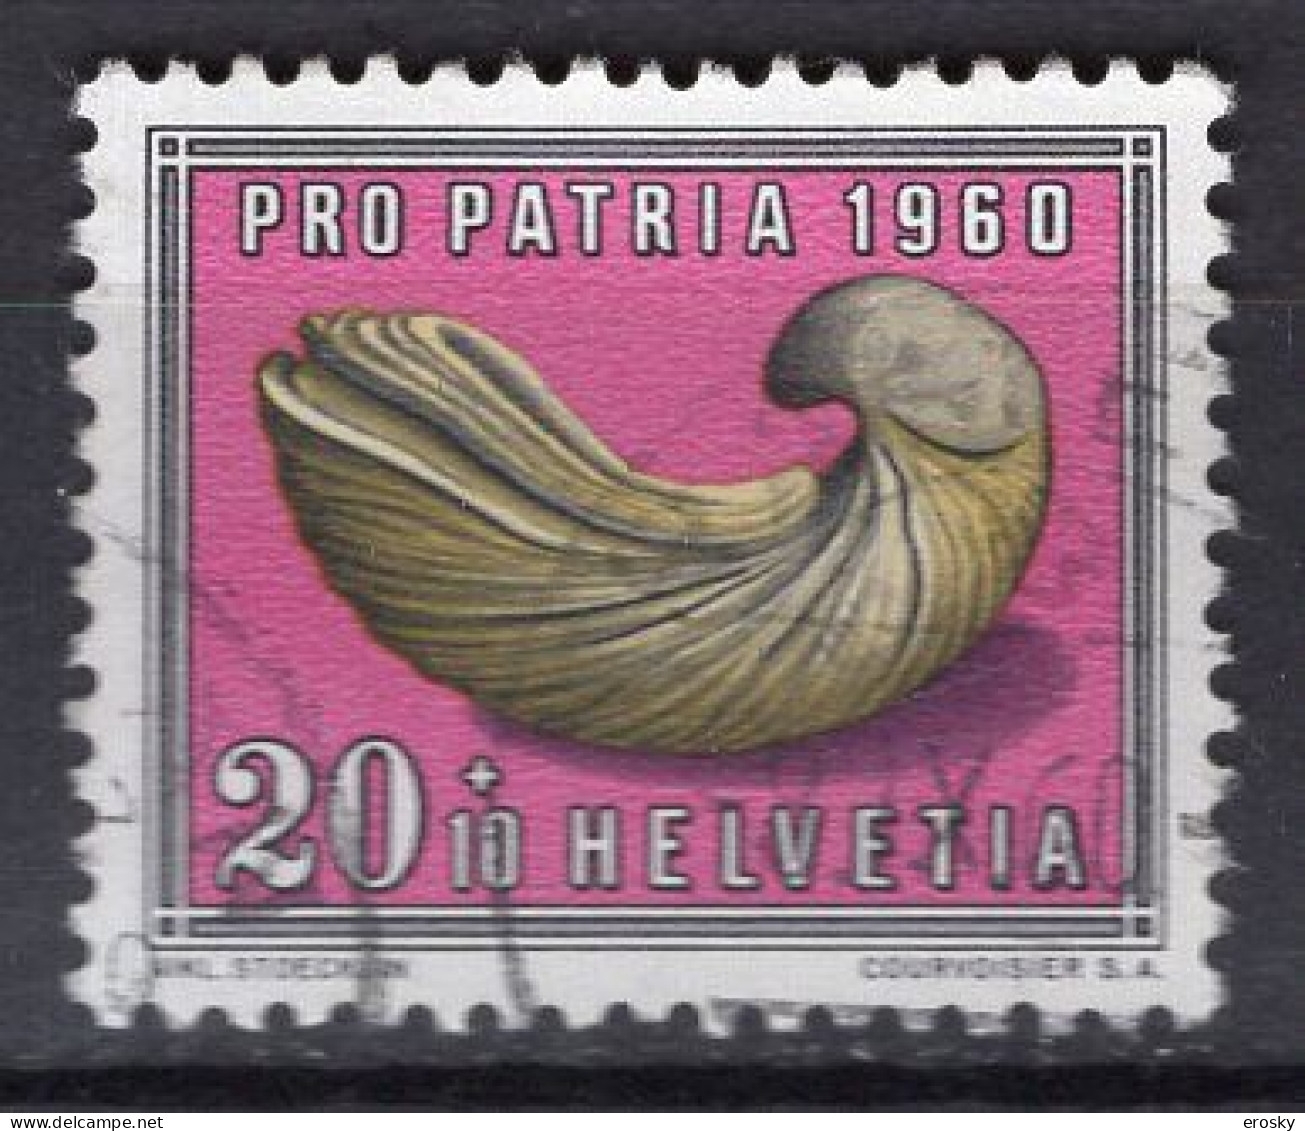 T3146 - SUISSE SWITZERLAND Yv N°663 Pro Patria Fete Nationale - Used Stamps